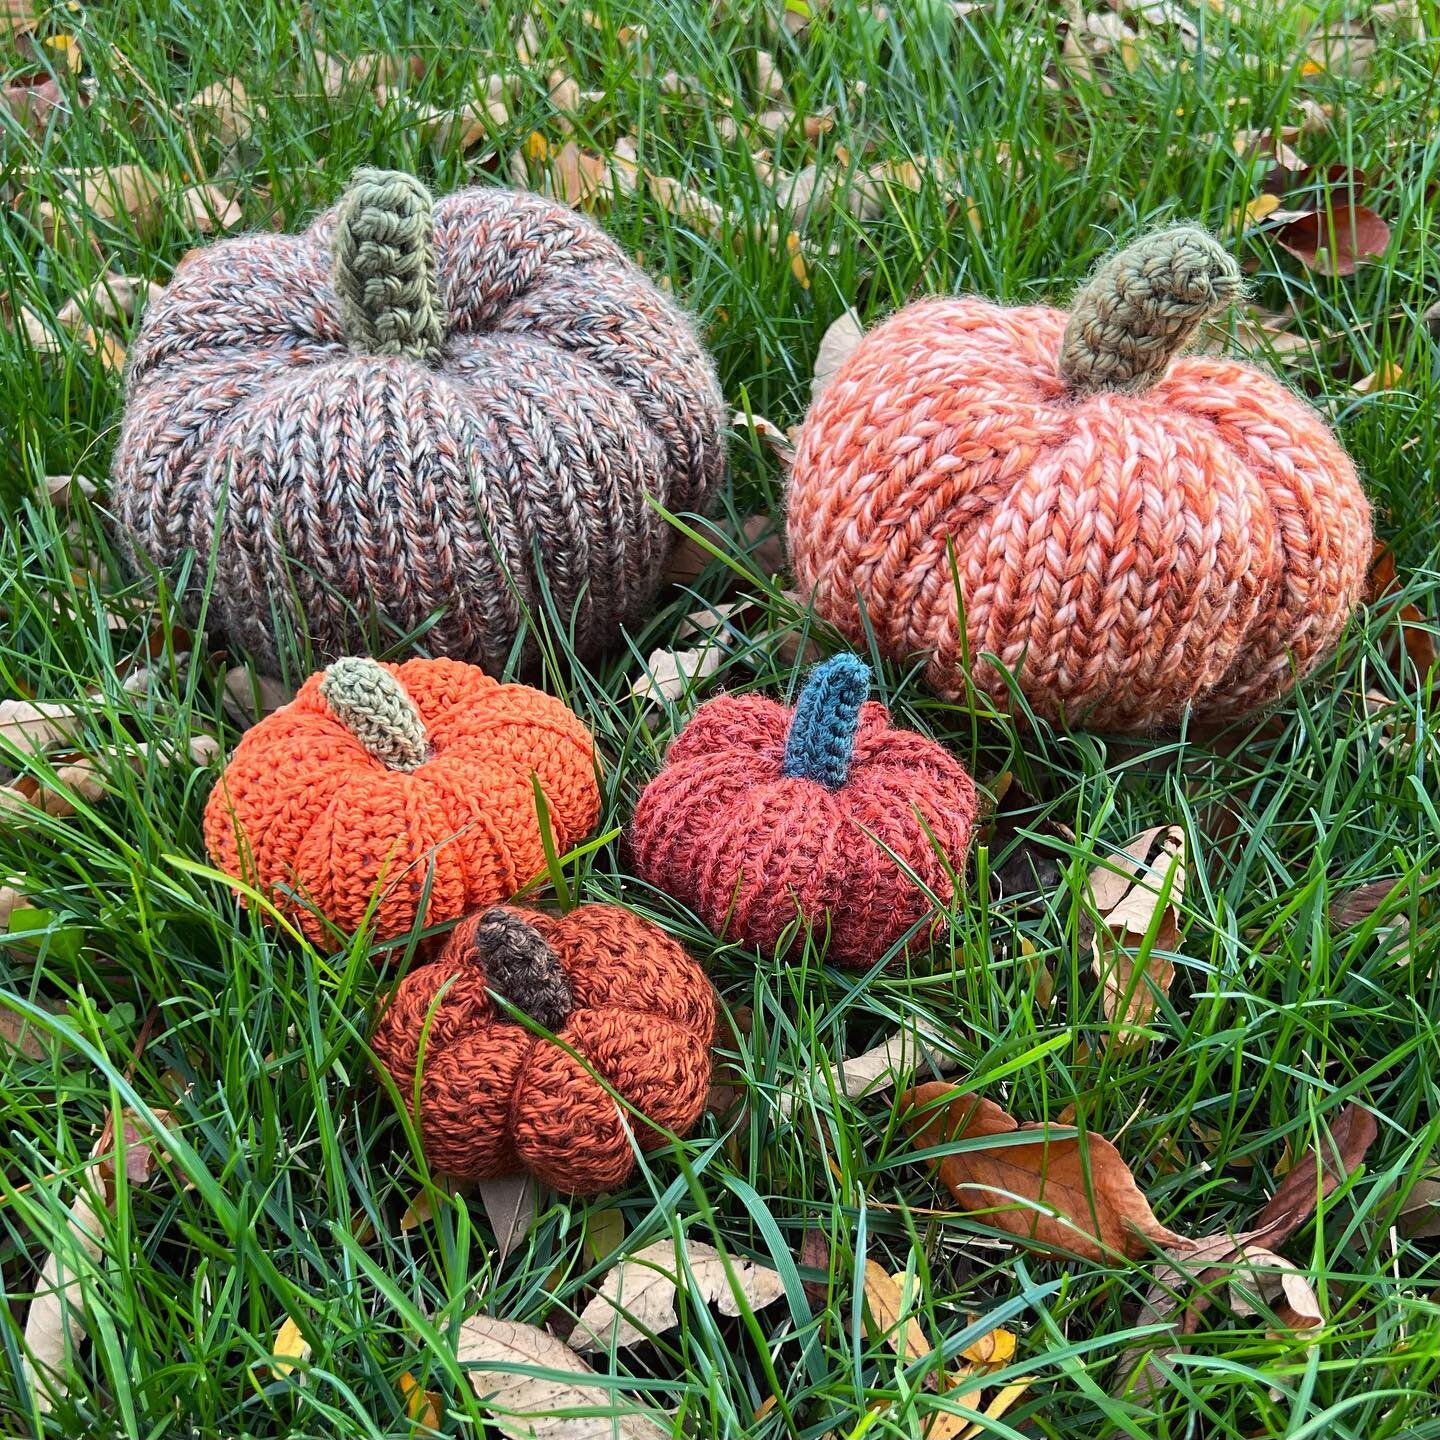 Oh my gourd!! 🙀🎃 Pumpkins in their various delicious crafted forms! I really enjoy making these, and exploring the incredible orange and fall-themed yarns that have been appearing in recent years.

Large hand-knitted stuffed pumpkins 
Small stuffed